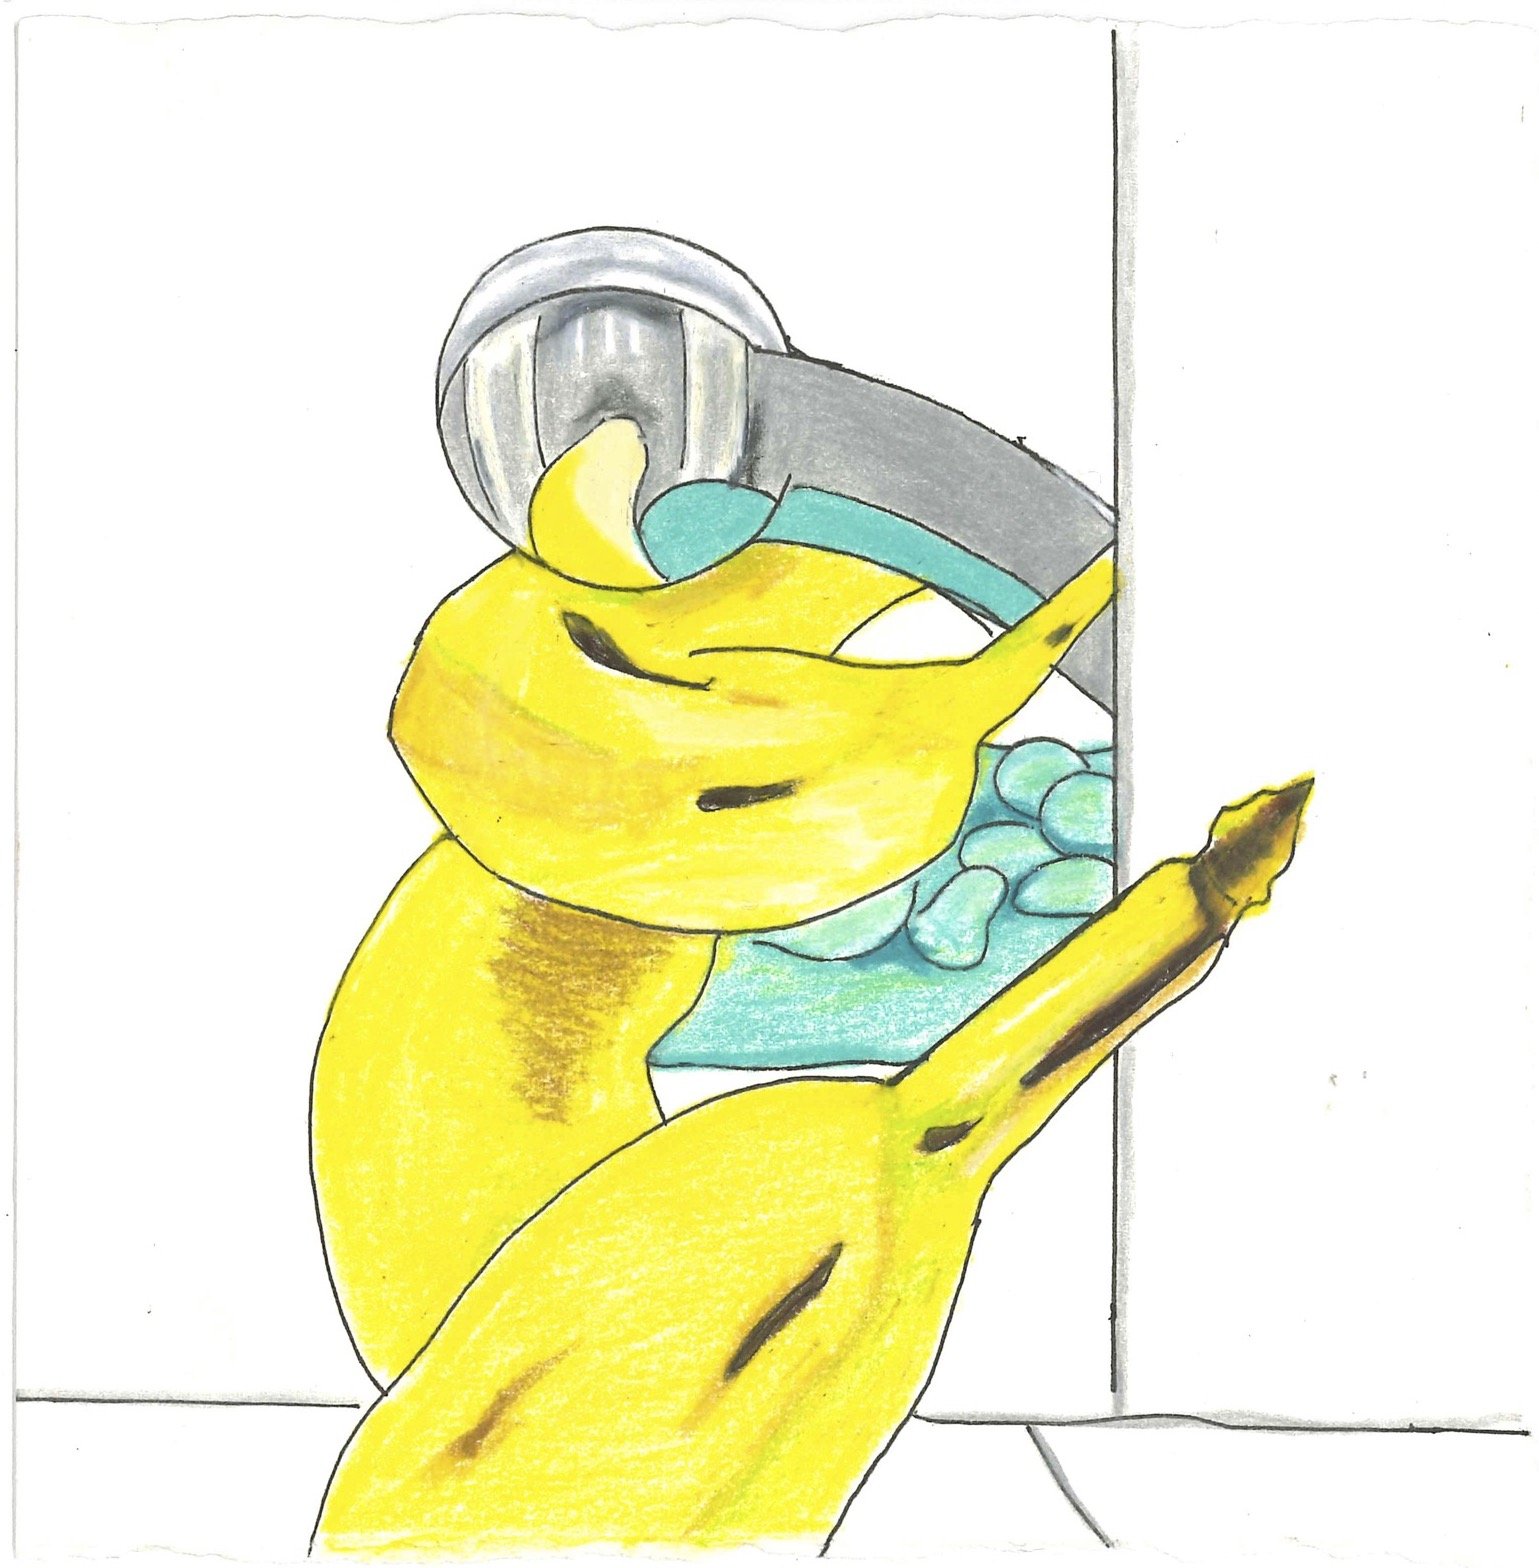   Mirror Drawing-Banana  colored pencil &amp; ink on paper,  5 x 5 inches 